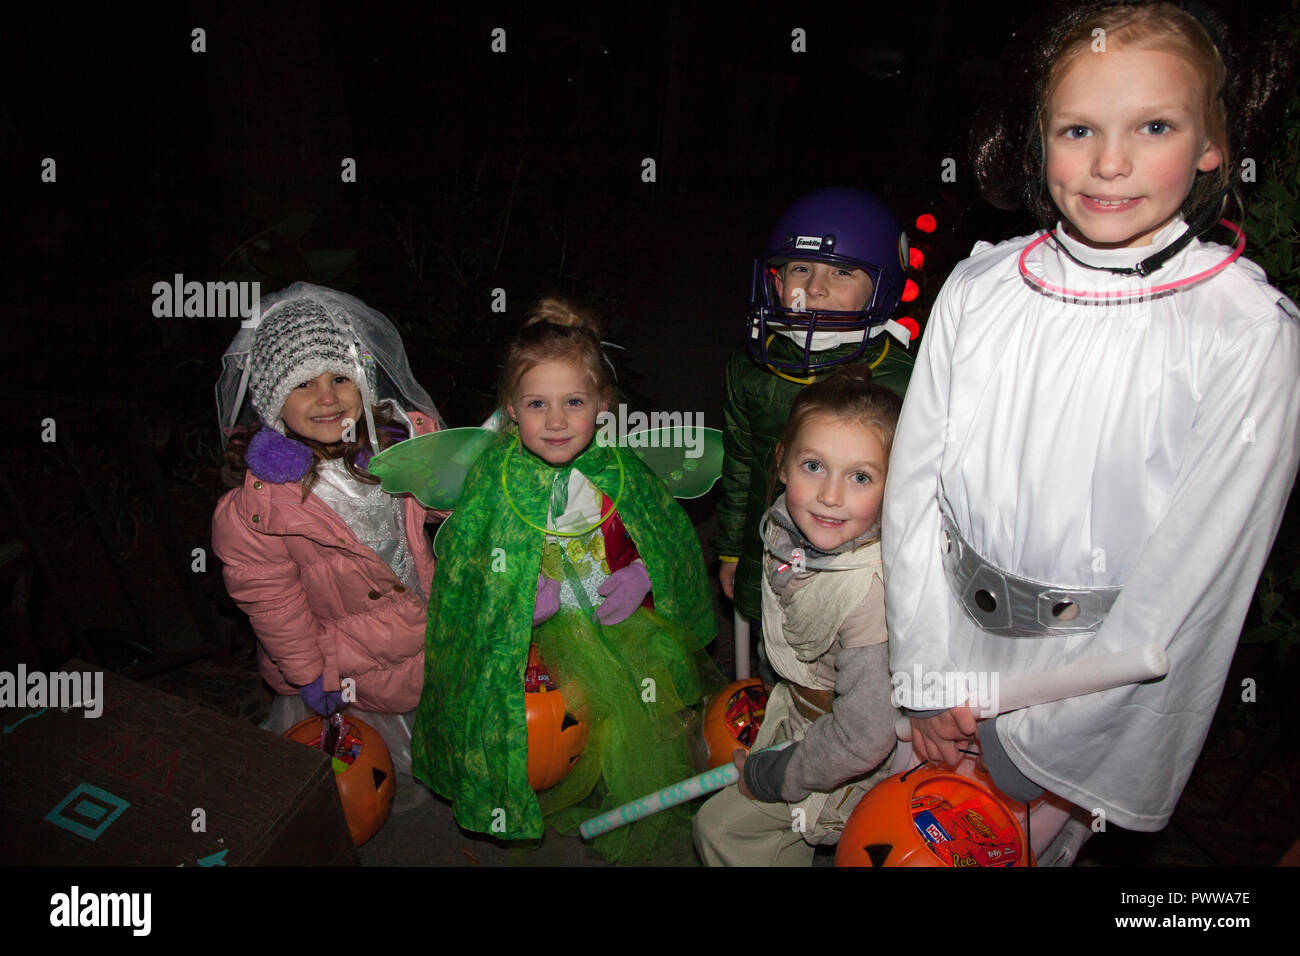 Group of young Halloween trick or treaters costumed as Princess Leia, fairy, Jedi Knight & football player. St Paul Minnesota MN USA Stock Photo